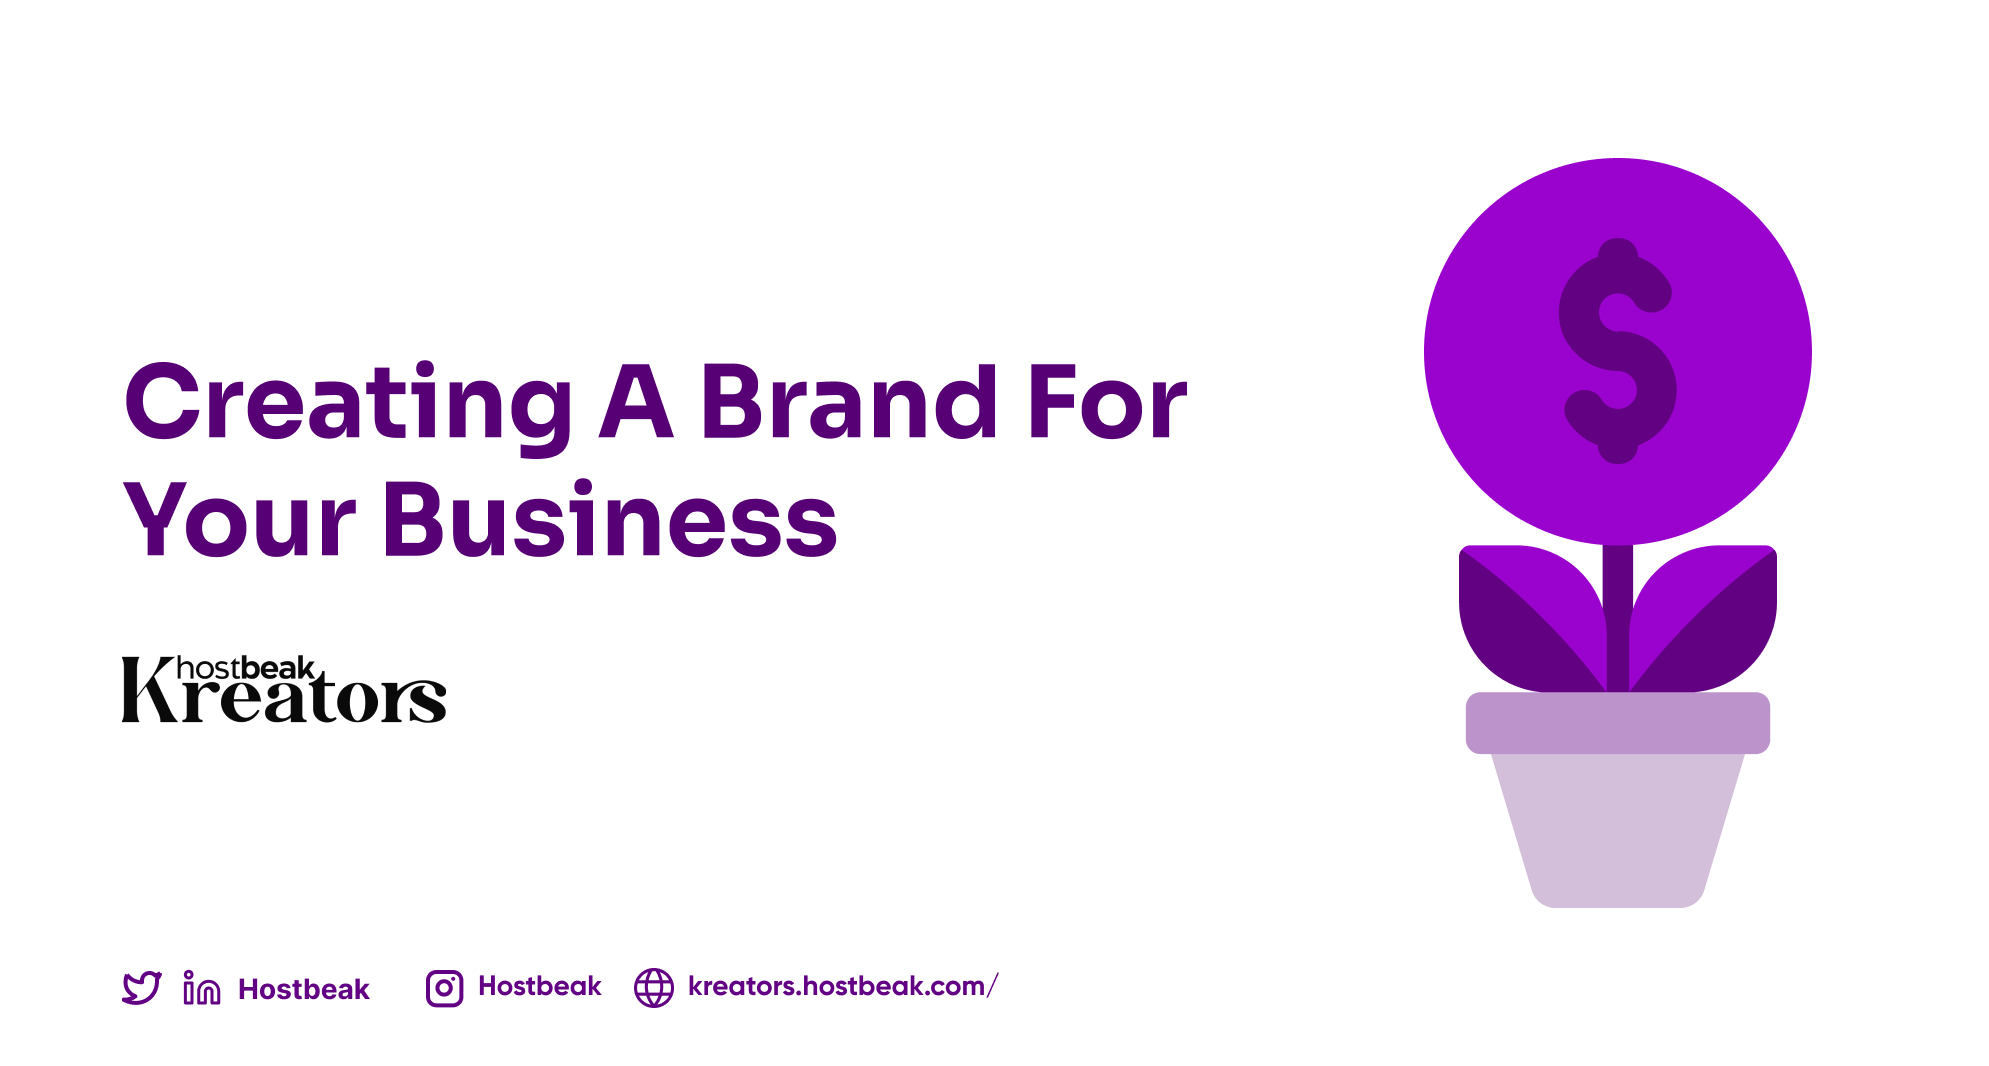 Creating a Brand for your business